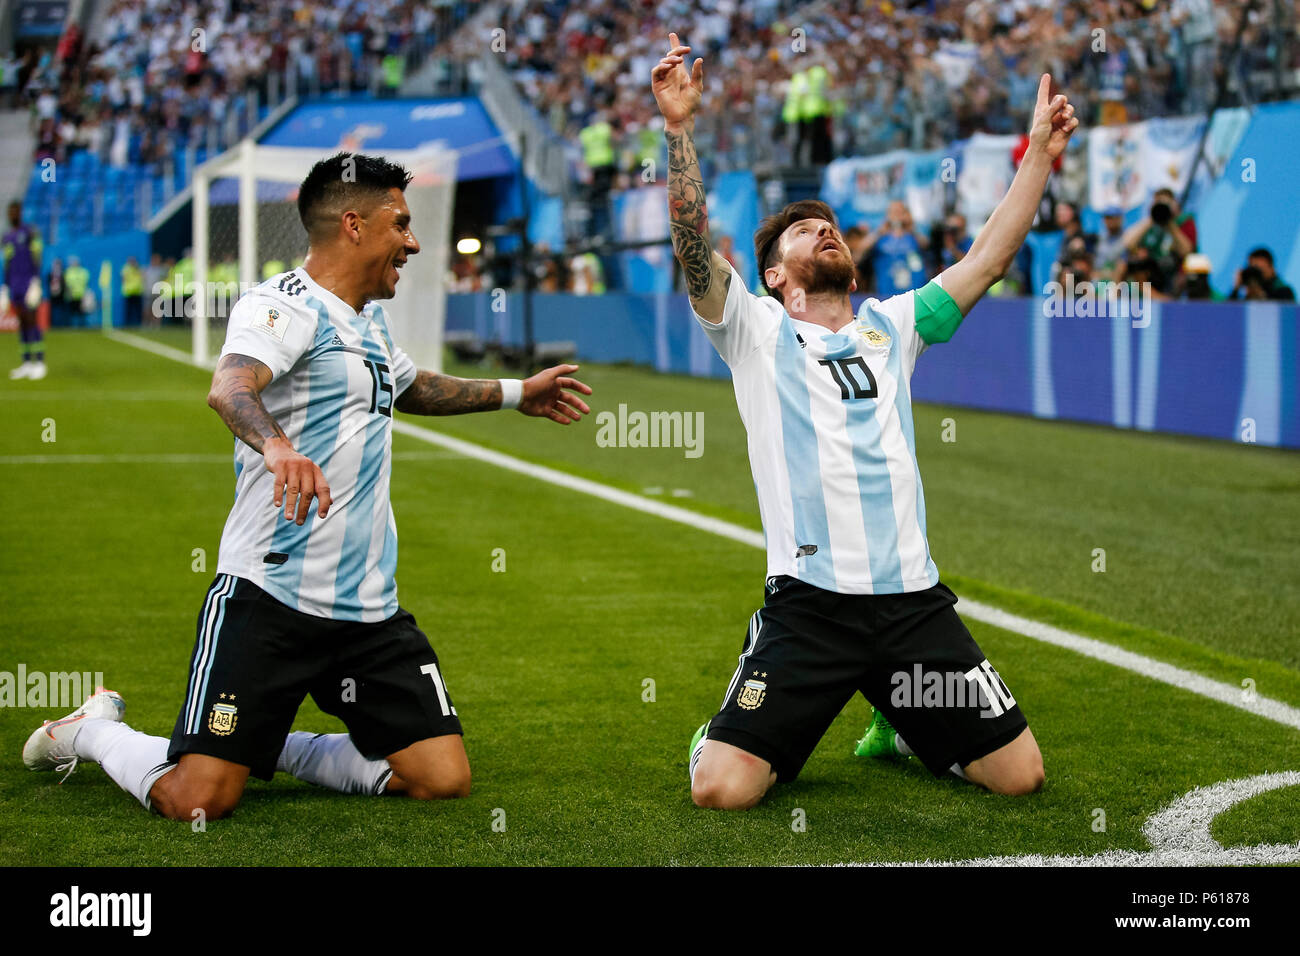 St Petersburg, Russia. 26th Jun, 2018. Lionel Messi of Argentina celebrates with Enzo Perez of Argentina after scoring his side's first goal to make the score 1-0 during the 2018 FIFA World Cup Group D match between Nigeria and Argentina at Saint Petersburg Stadium on June 26th 2018 in Saint Petersburg, Russia. (Photo by Daniel Chesterton/phcimages.com) Credit: PHC Images/Alamy Live News Stock Photo